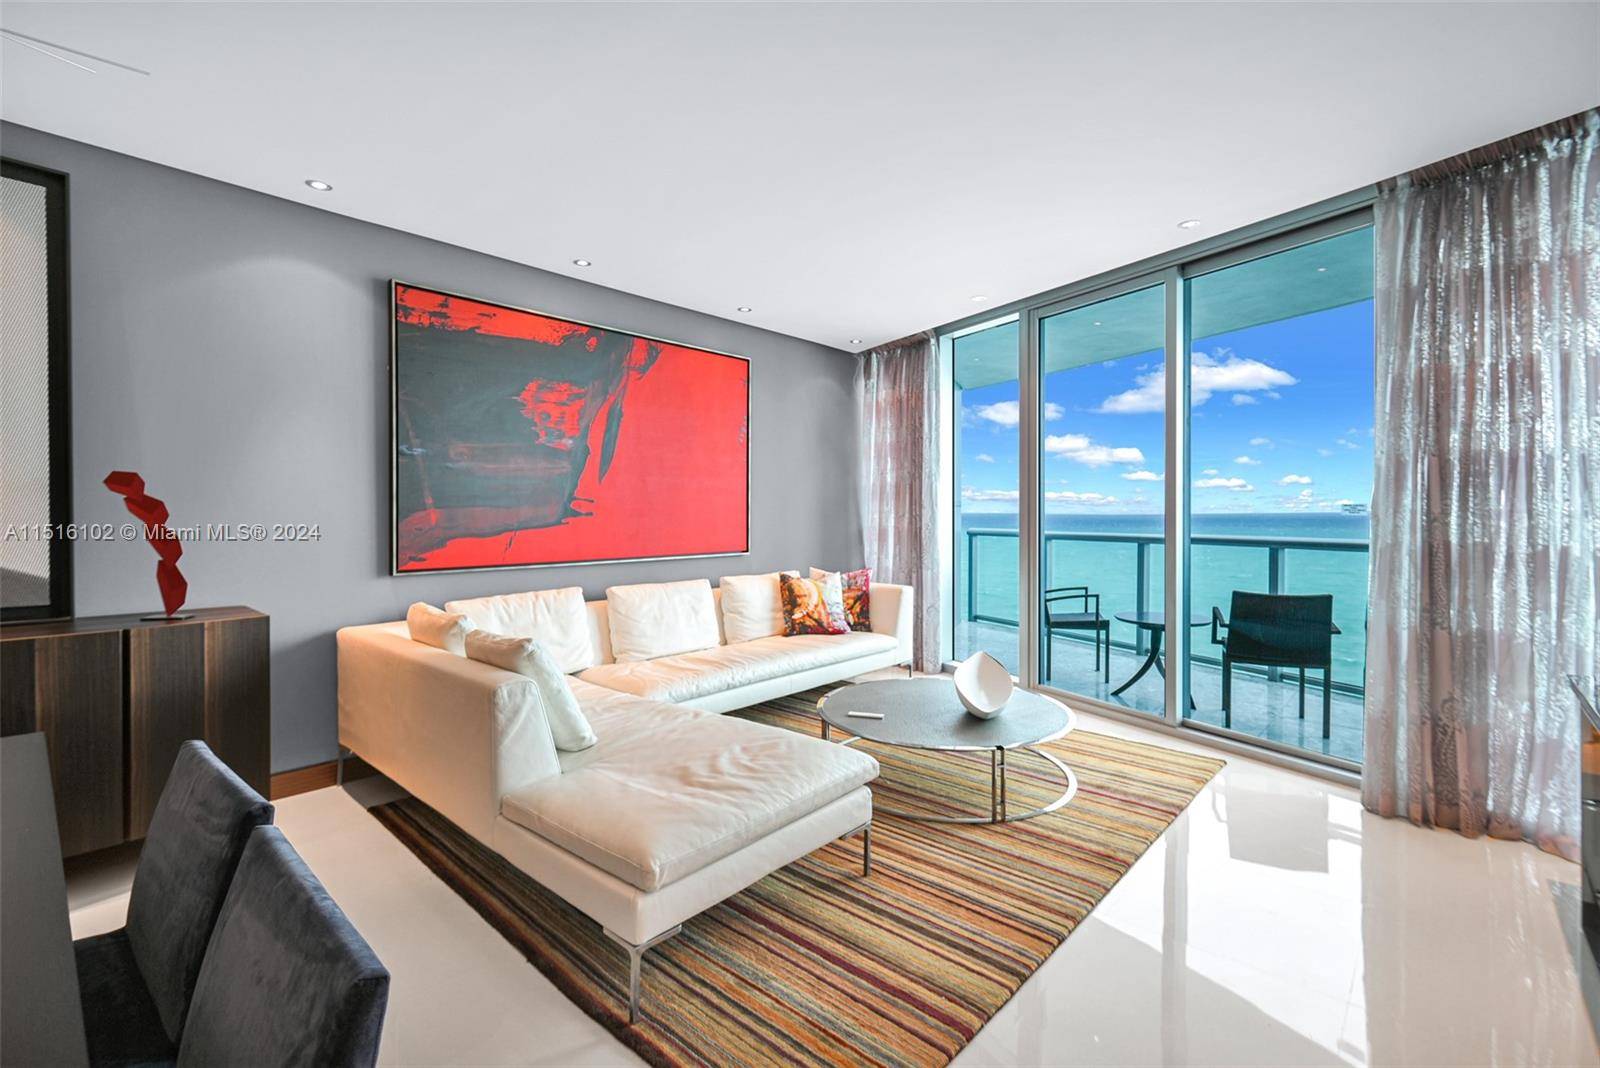 ONE OF ITS KIND, SPECTACULAR MODIFY LAYOUT LUXURY APARTMENT WITH OUTSTANDING DIRECT OCEAN, INTRACOASTAL AND CITY VIEWS.